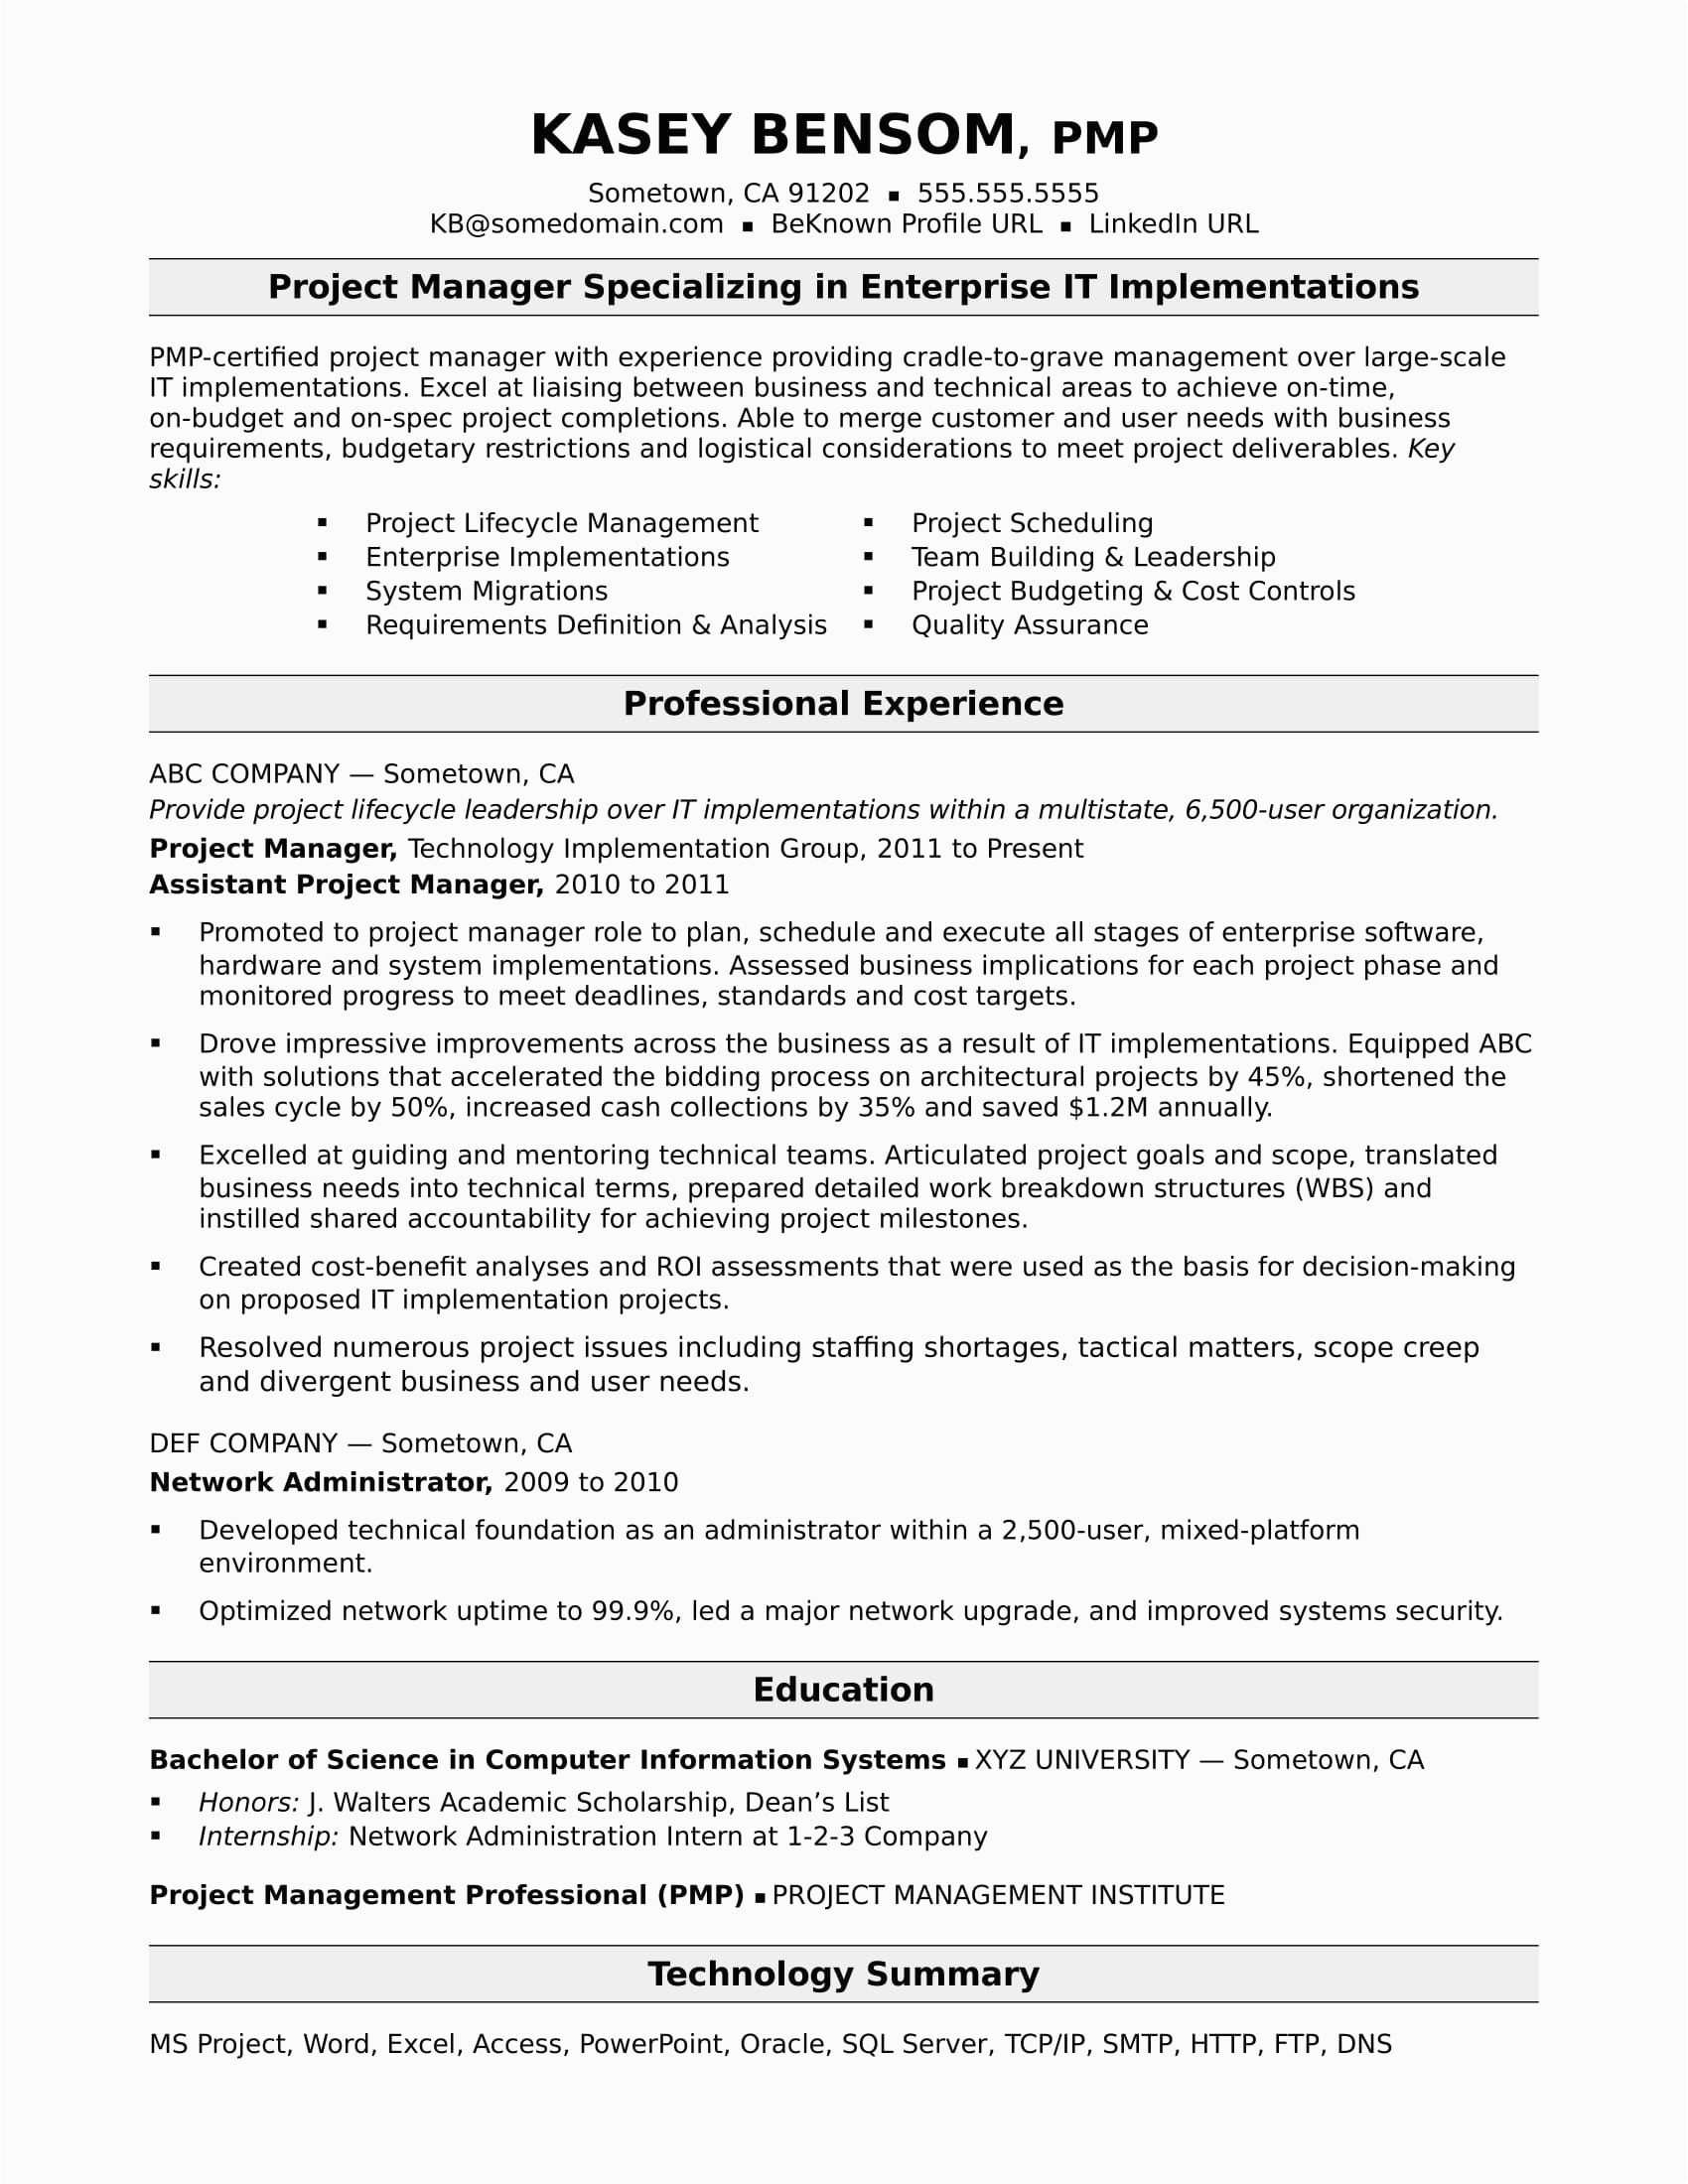 Sample Of Great Project Manager Resume Experienced It Project Manager Resume Sample